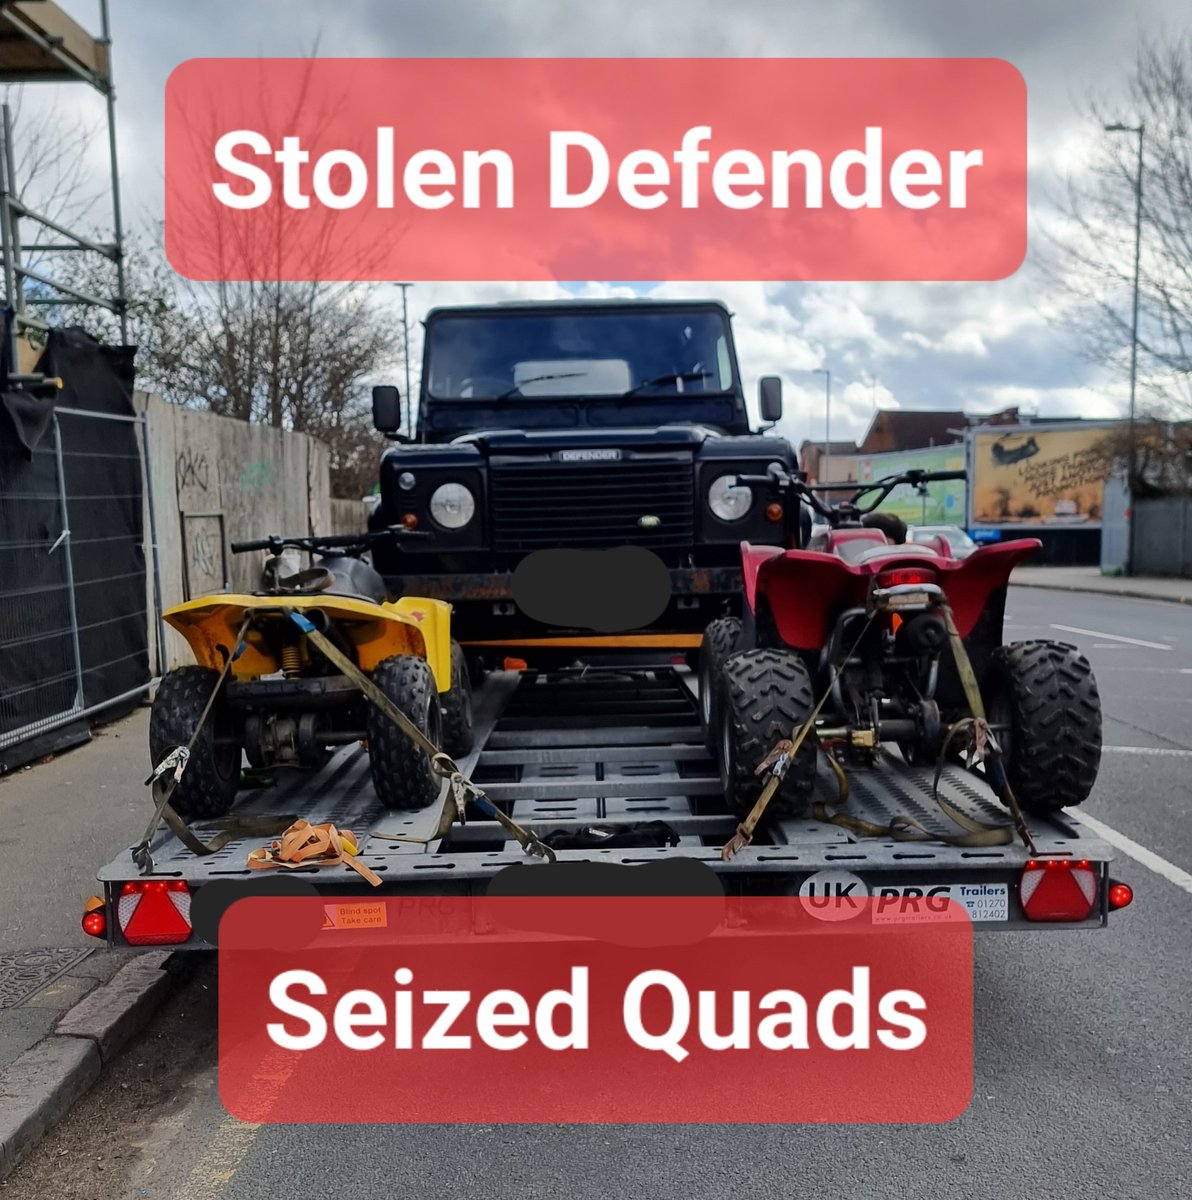 Busy morning for the team with joint visits with #BTP & #EnvironmentAgency resulting in the recovery of a stolen Defender & the seizure of numerous other vehicles #teamwork #multiagency